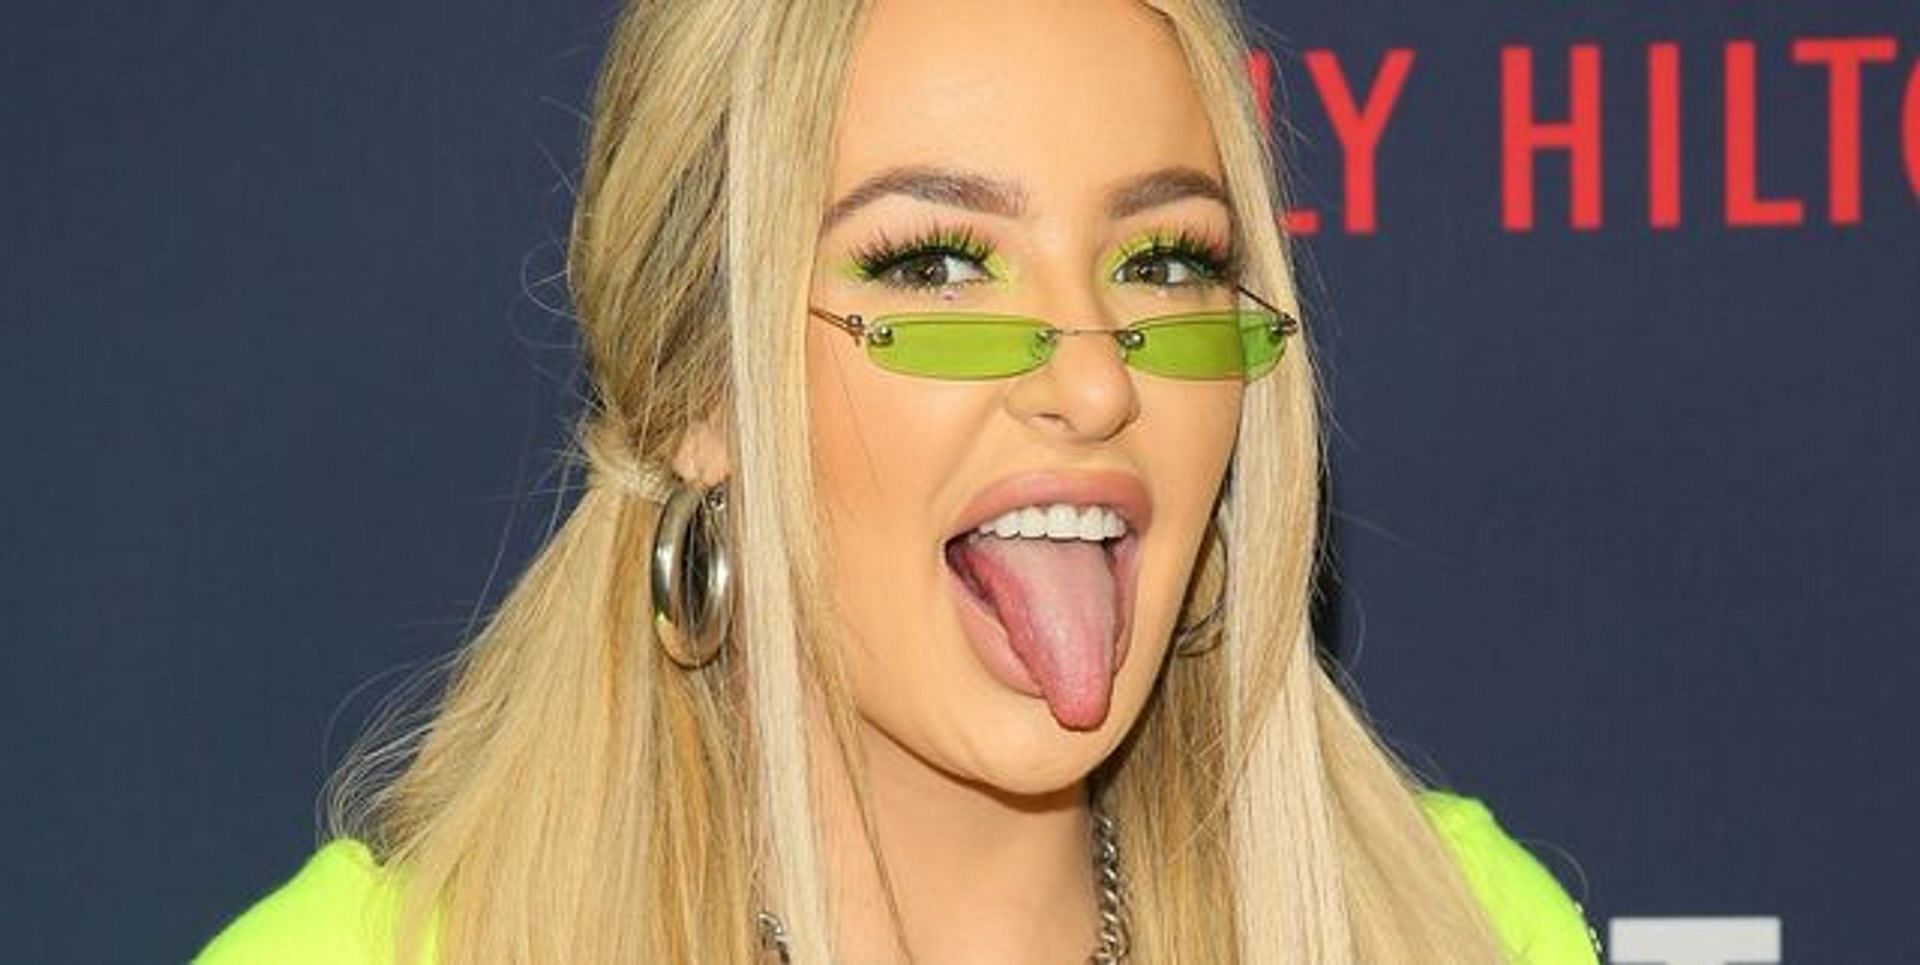 Tana Mongeau under fire for her phone wallpaper (Image via Getty Images)